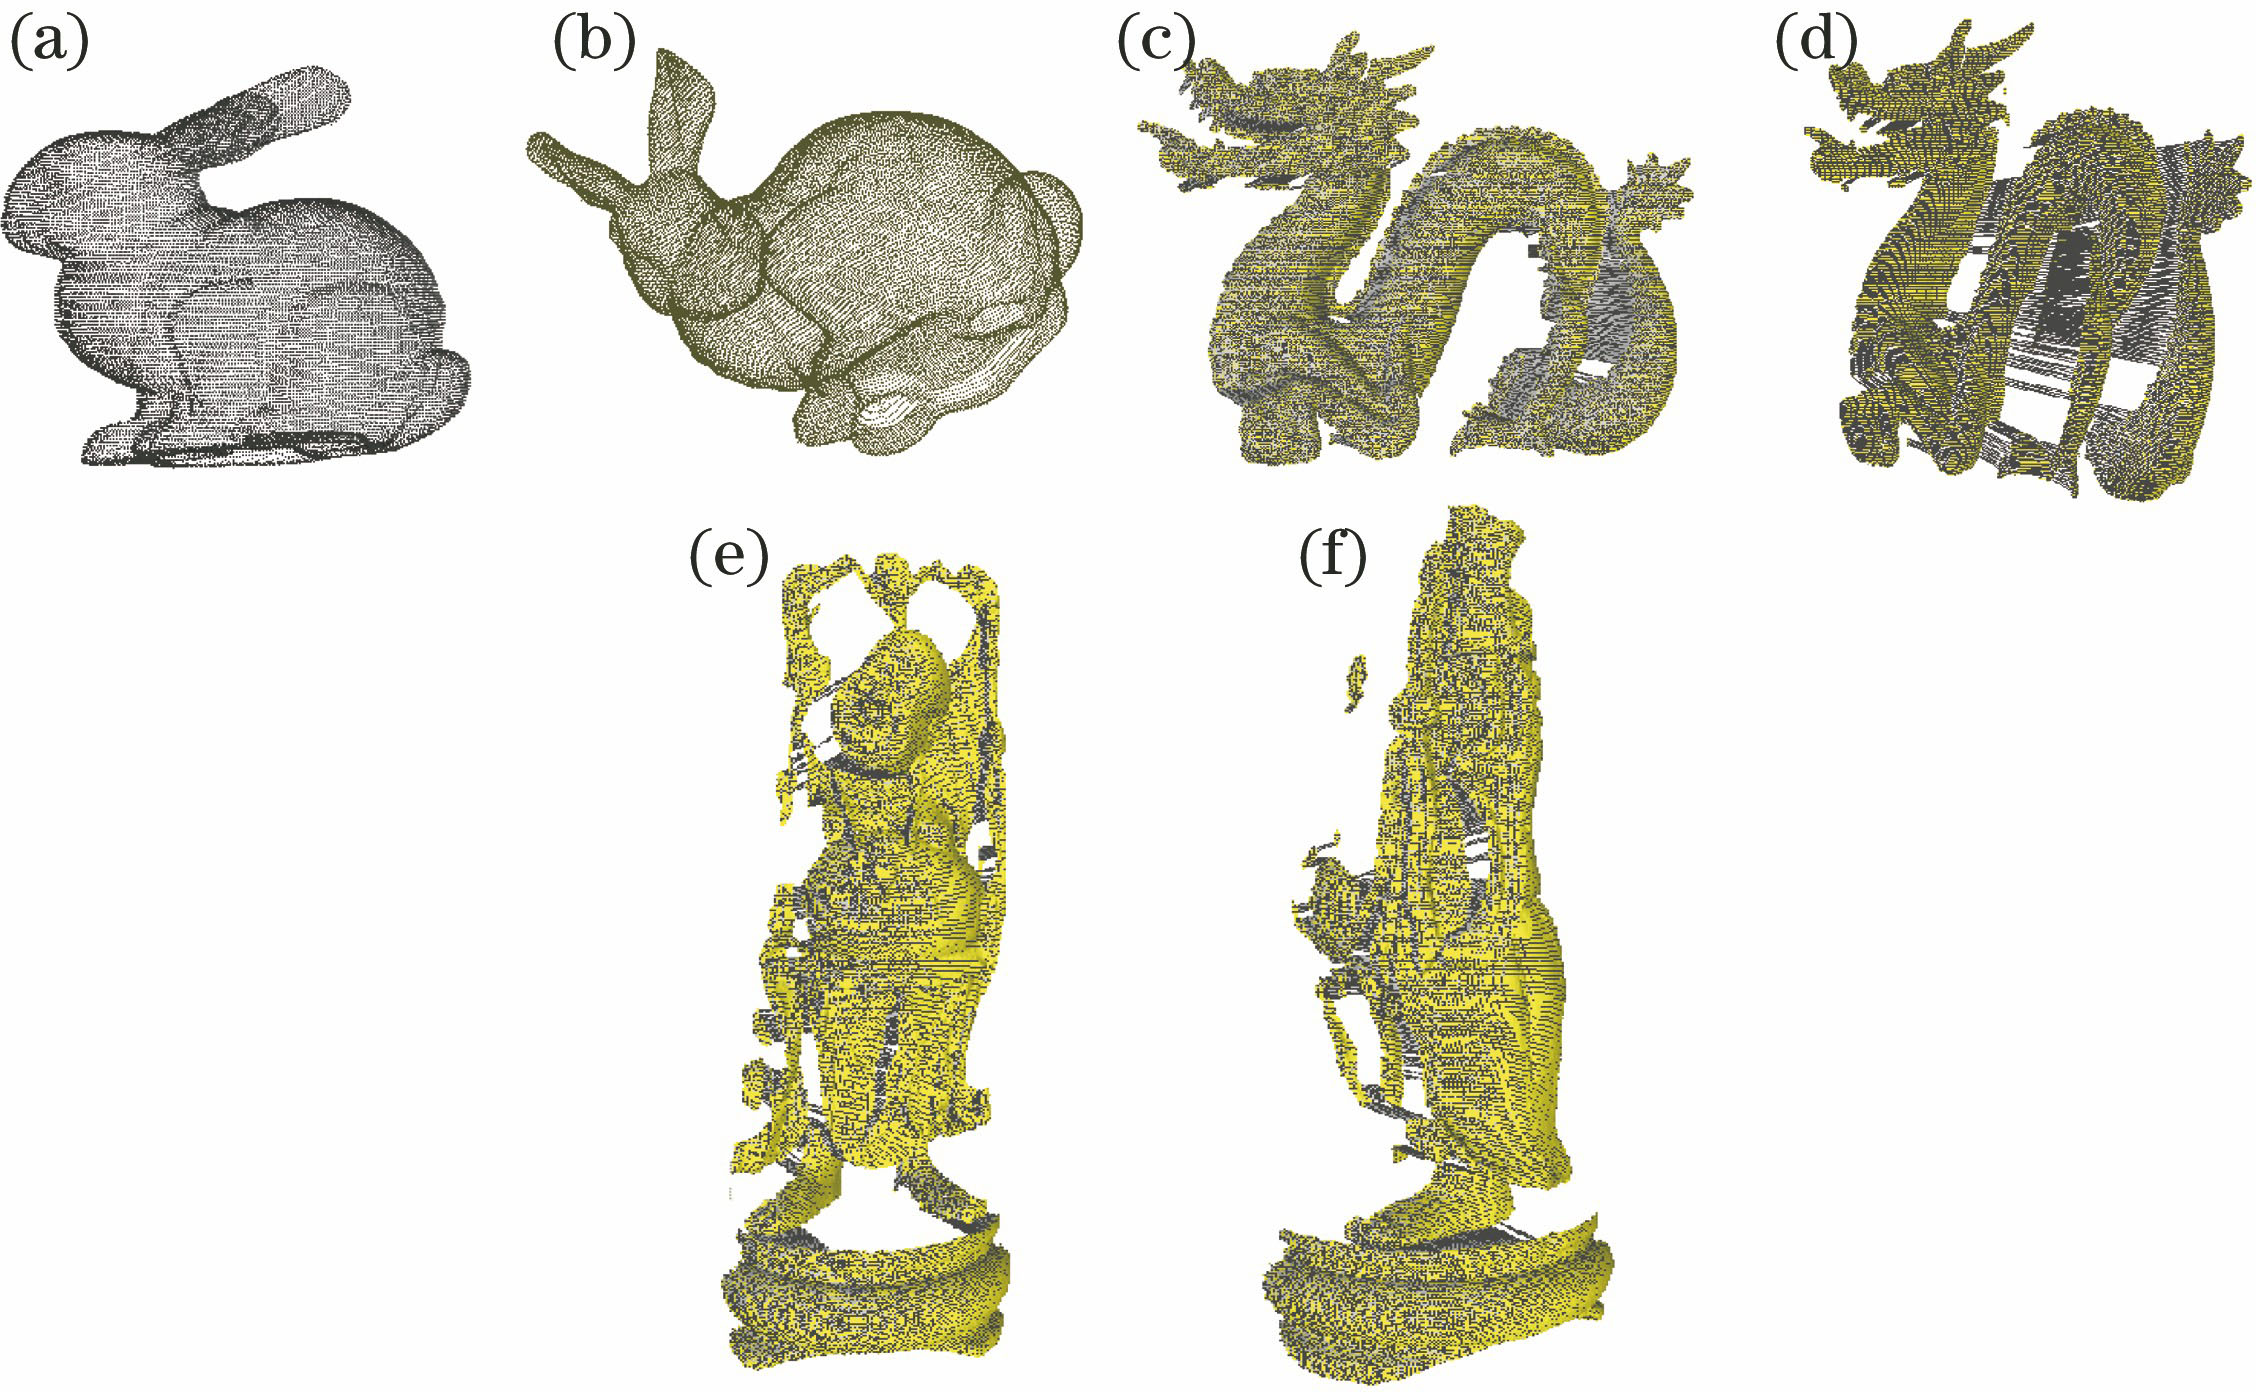 Point cloud model. (a)(b) Bunny at different angles; (c)(d) Dragon at different angles; (e)(f) Happy at different angles